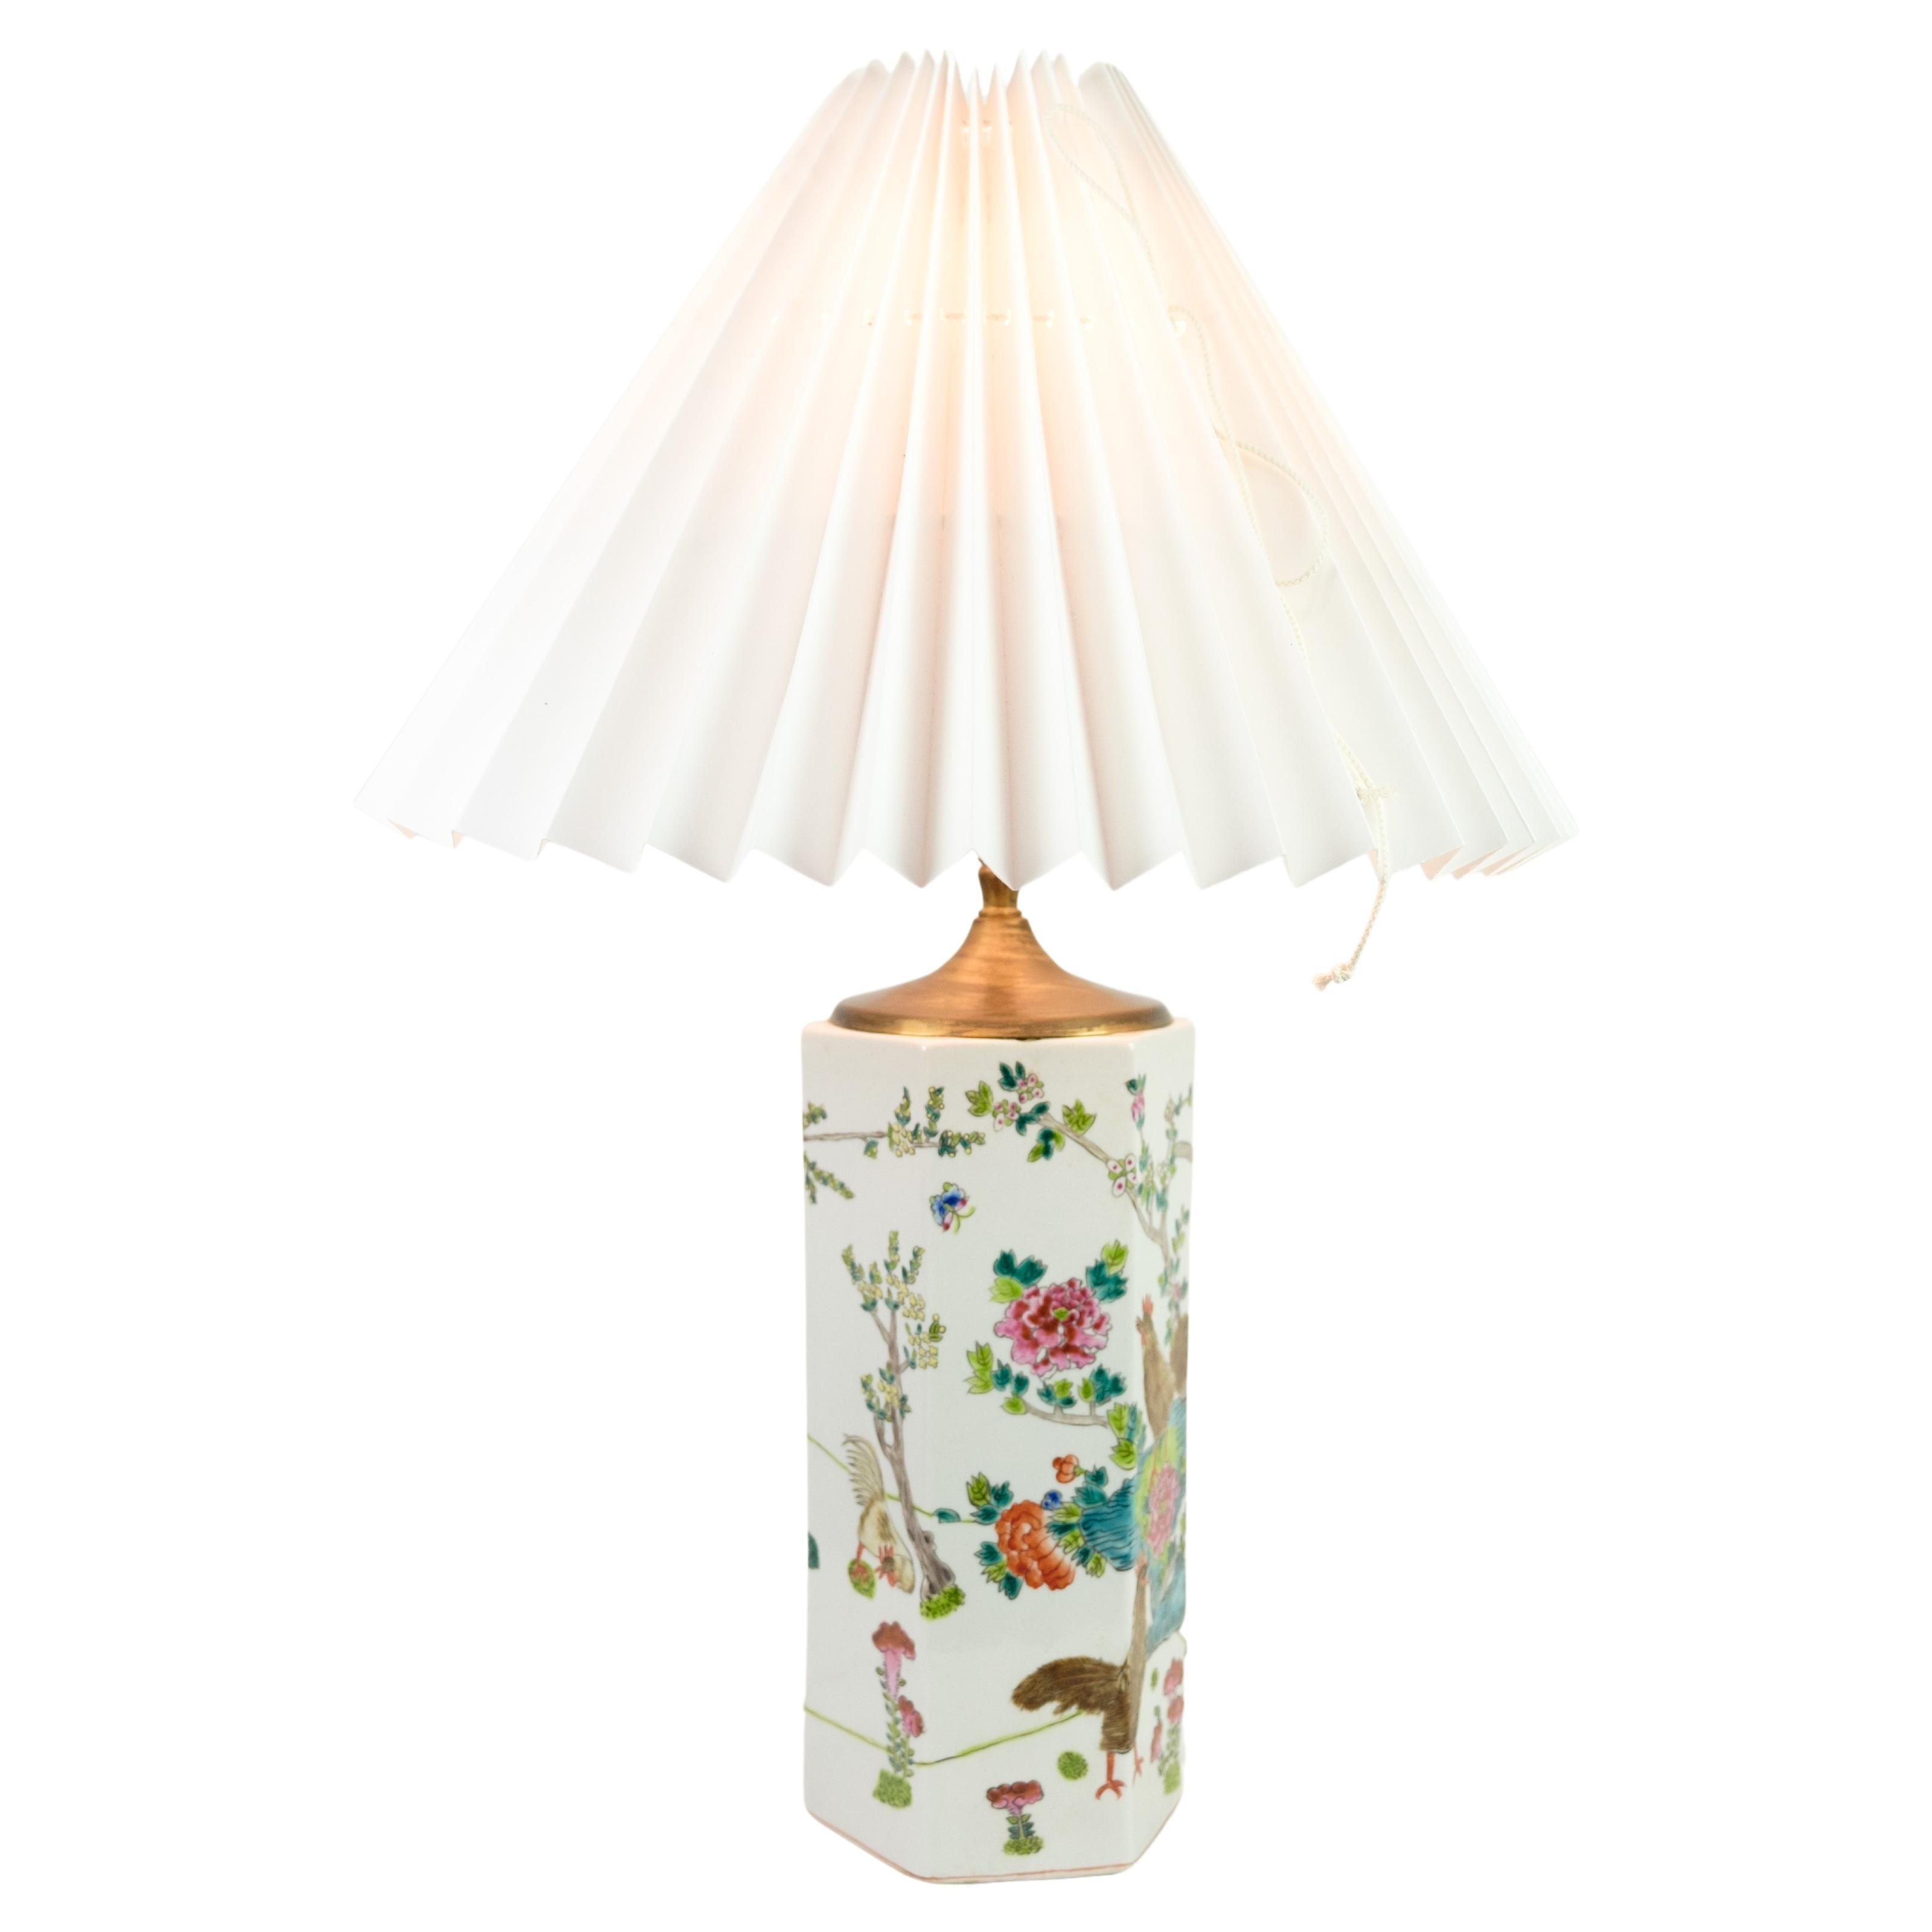 Chinese Table Lamp Made In Porcelain With White Shade From 1920s im Angebot